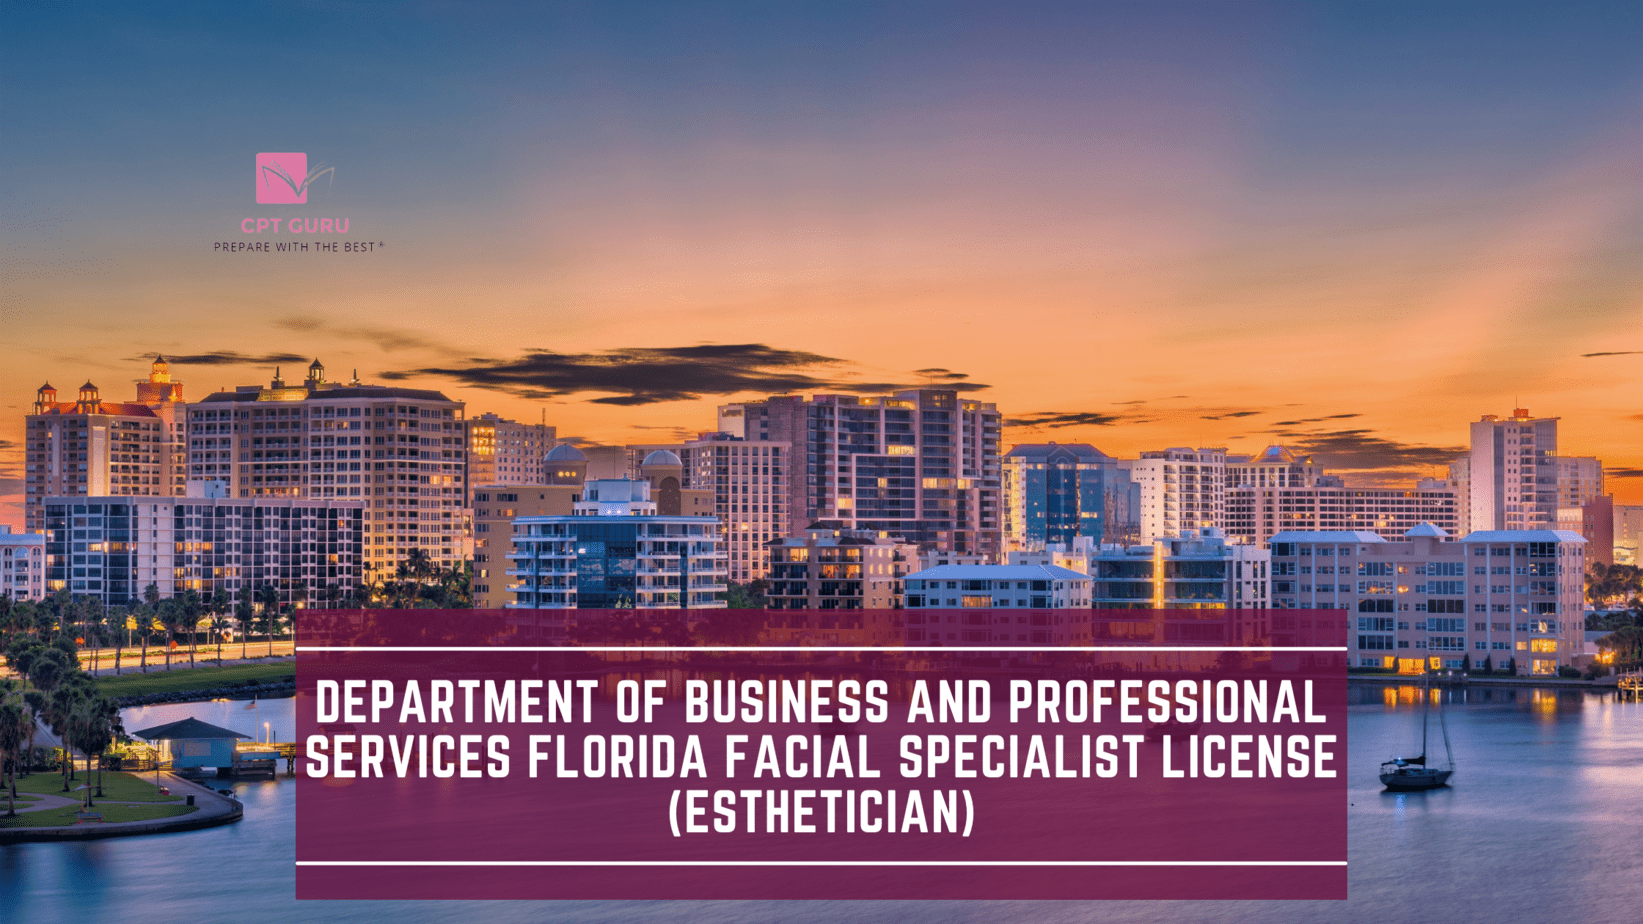 Department of Business and Professional Services Florida Facial Specialist License (Esthetician)